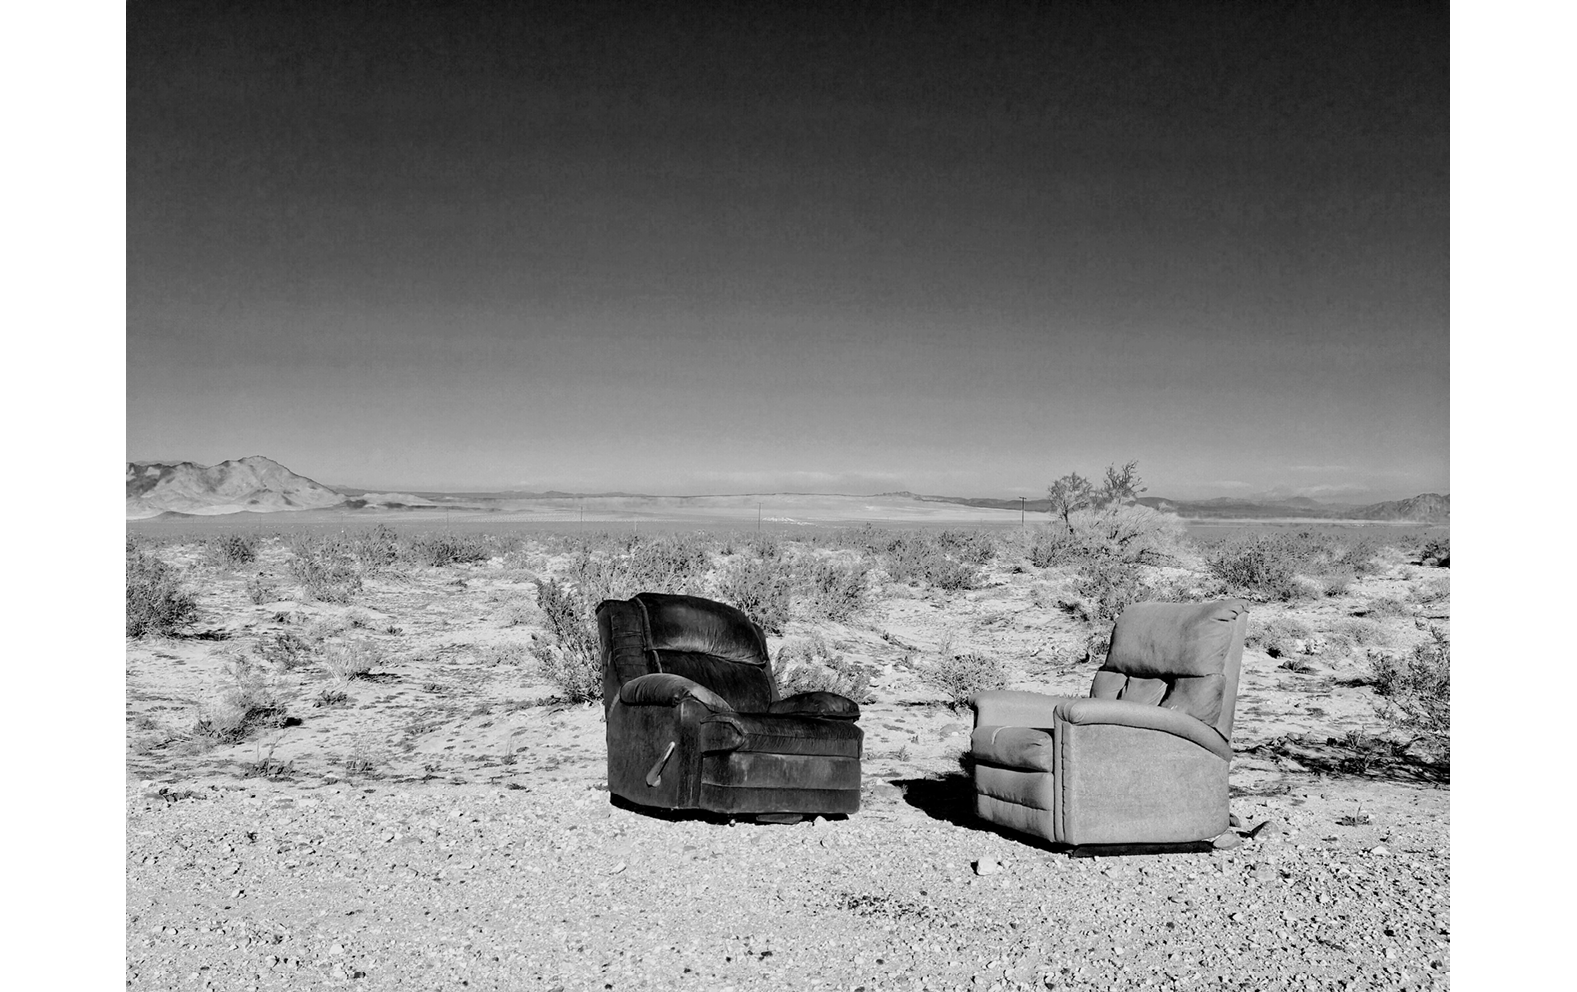 Two abandoned chairs, one black, one white, in a desert landscape.